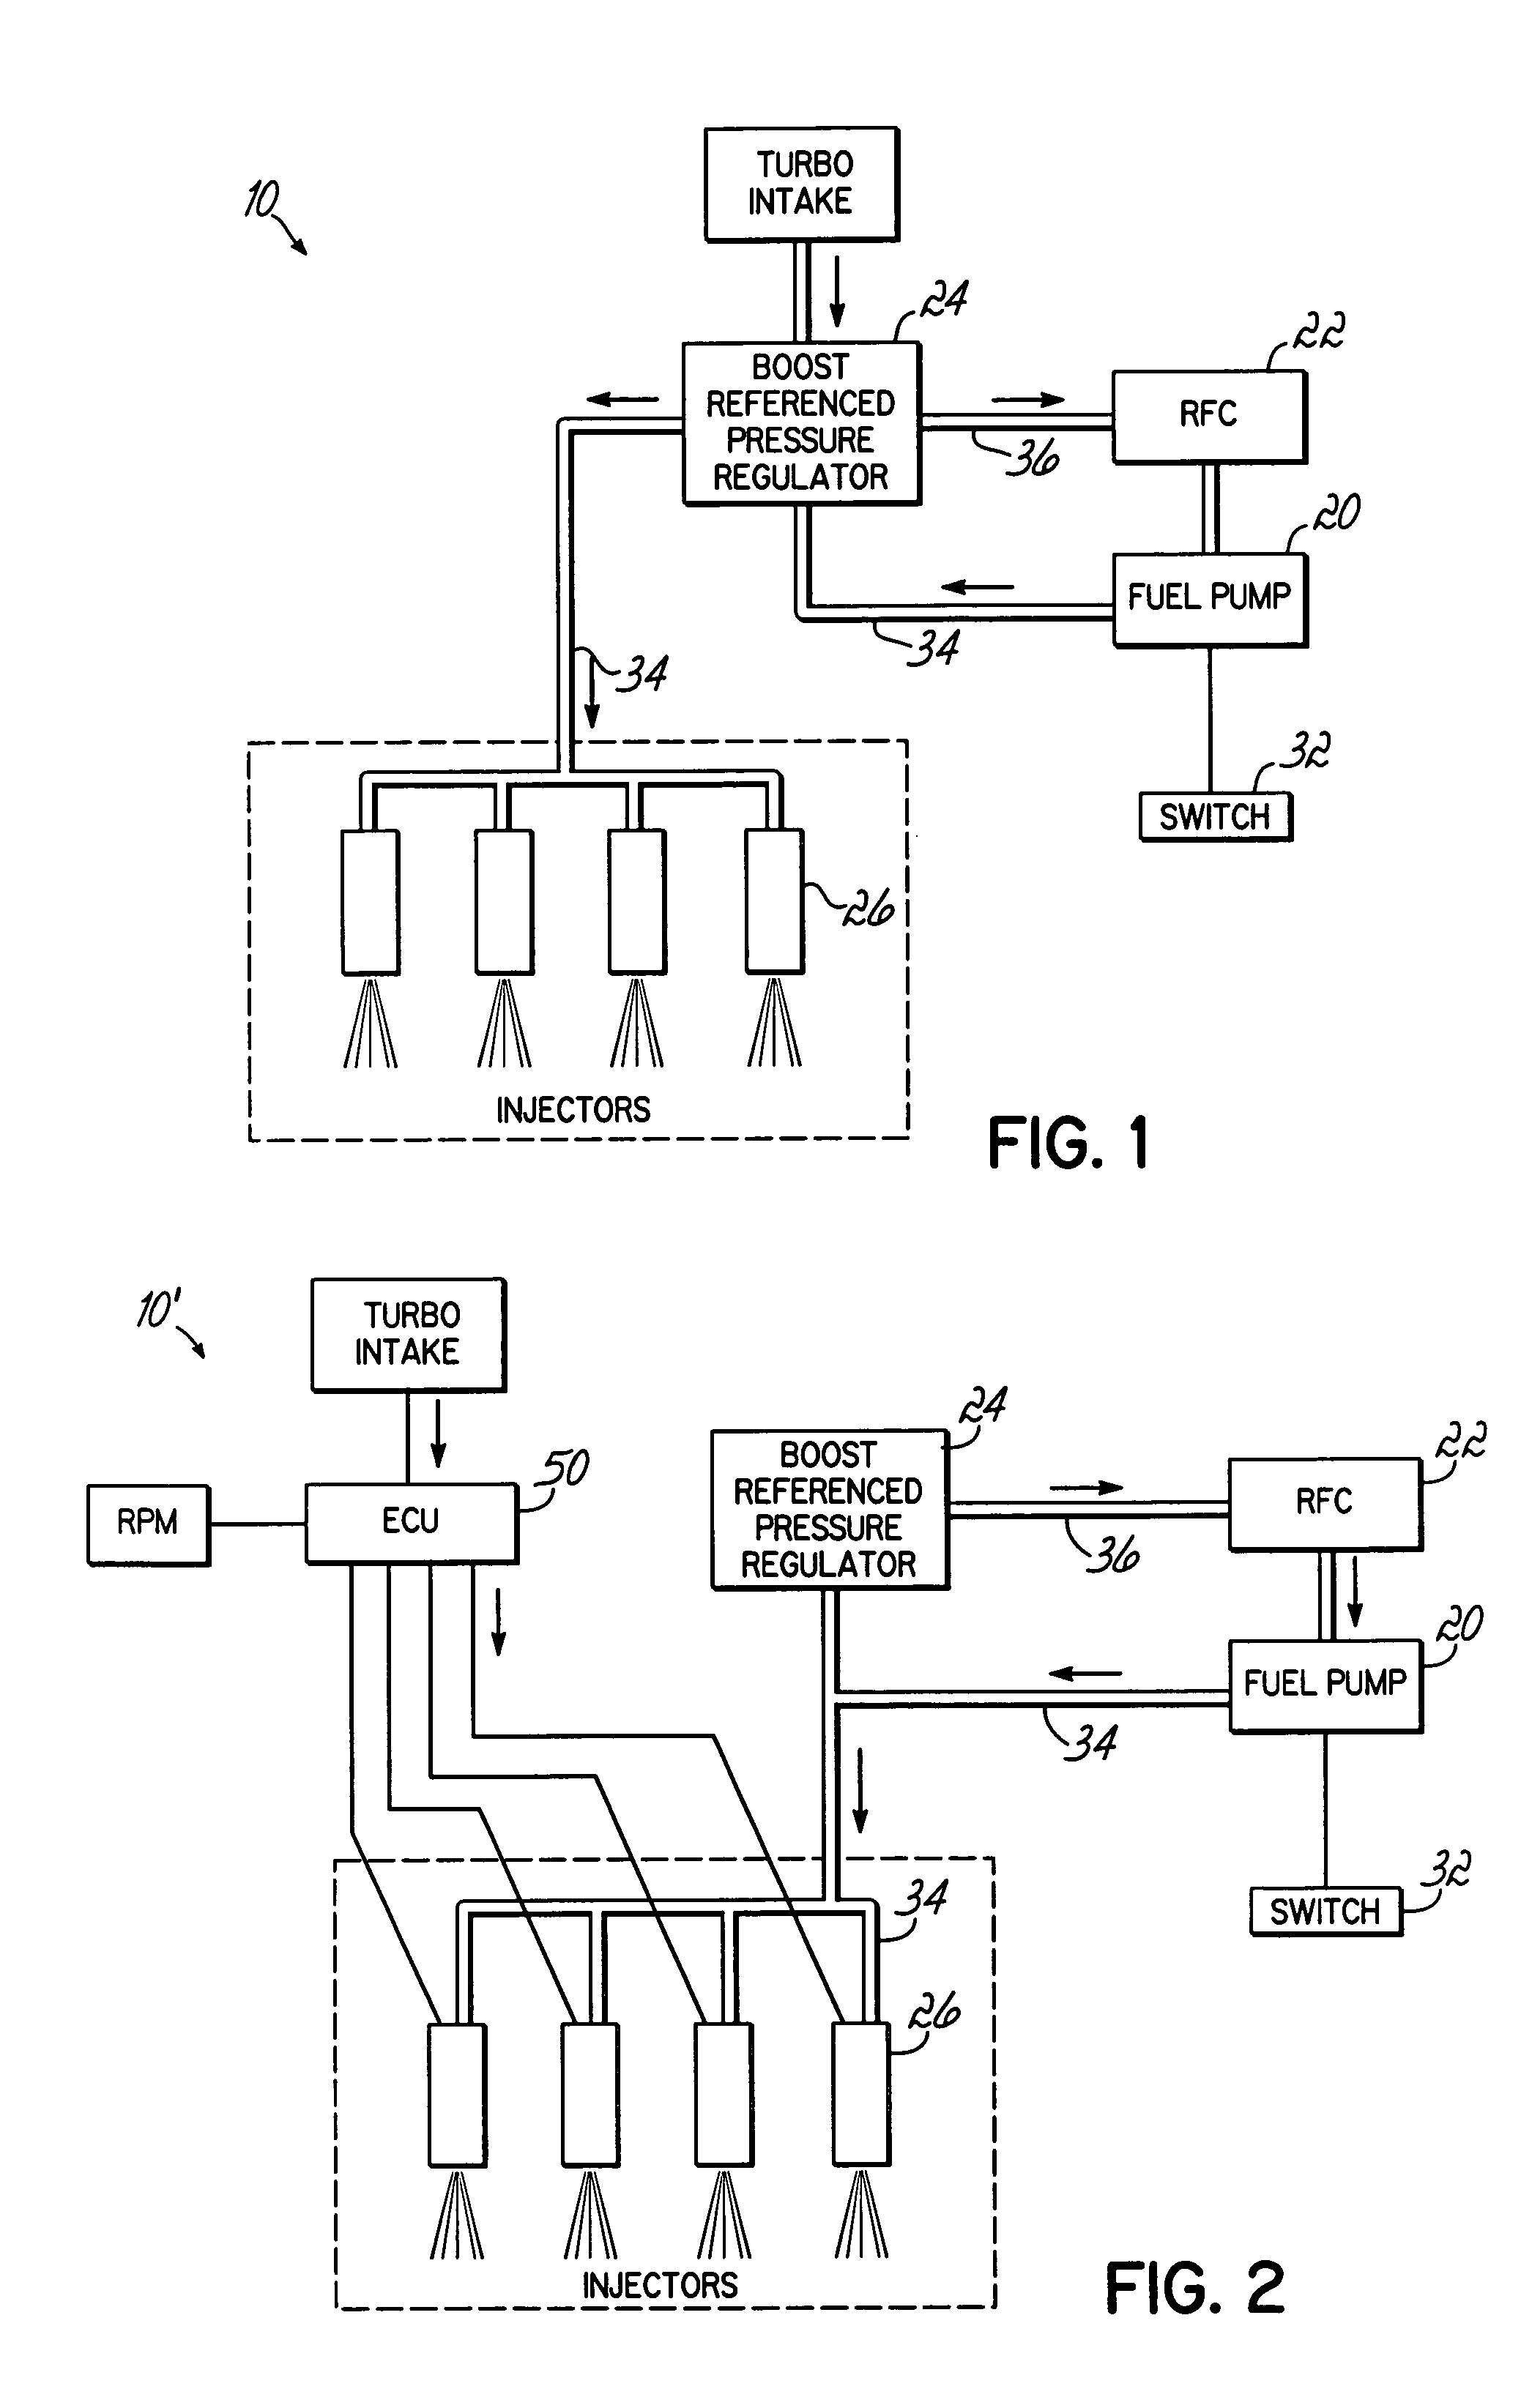 System and method for operating an internal combustion engine